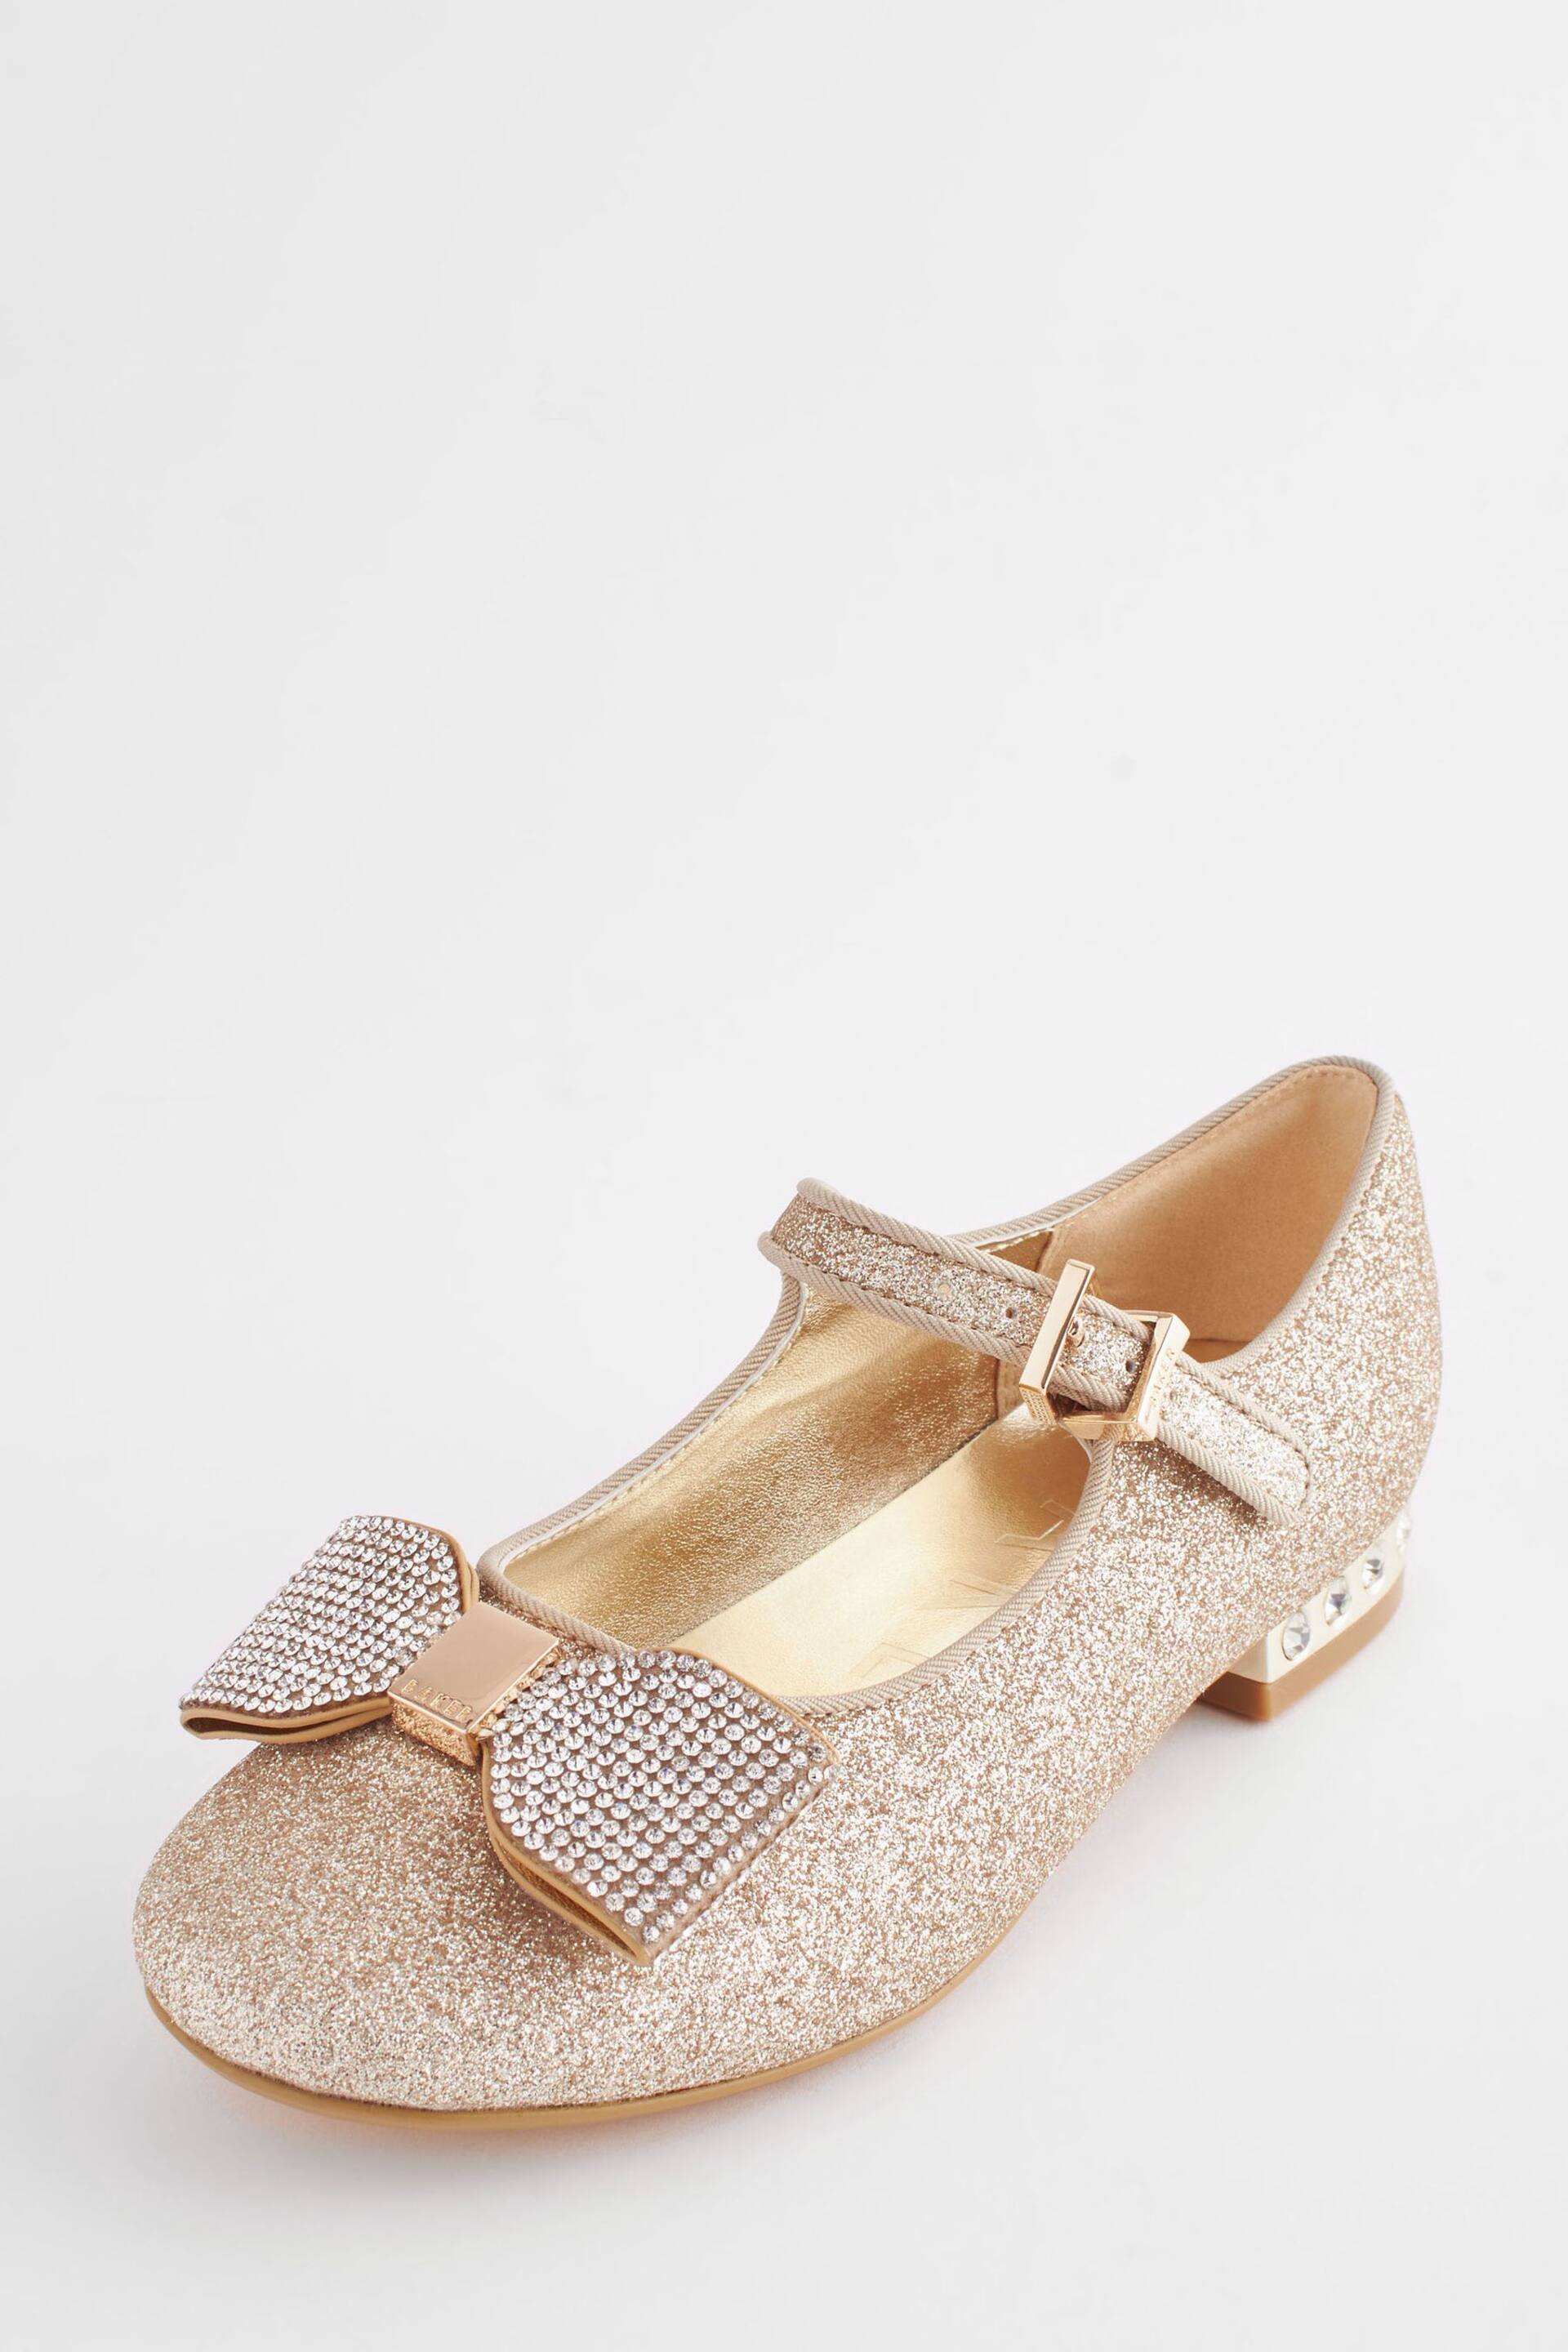 Baker by Ted Baker Girls Gold Glitter Shoes with Rhinestone Bow - Image 1 of 6